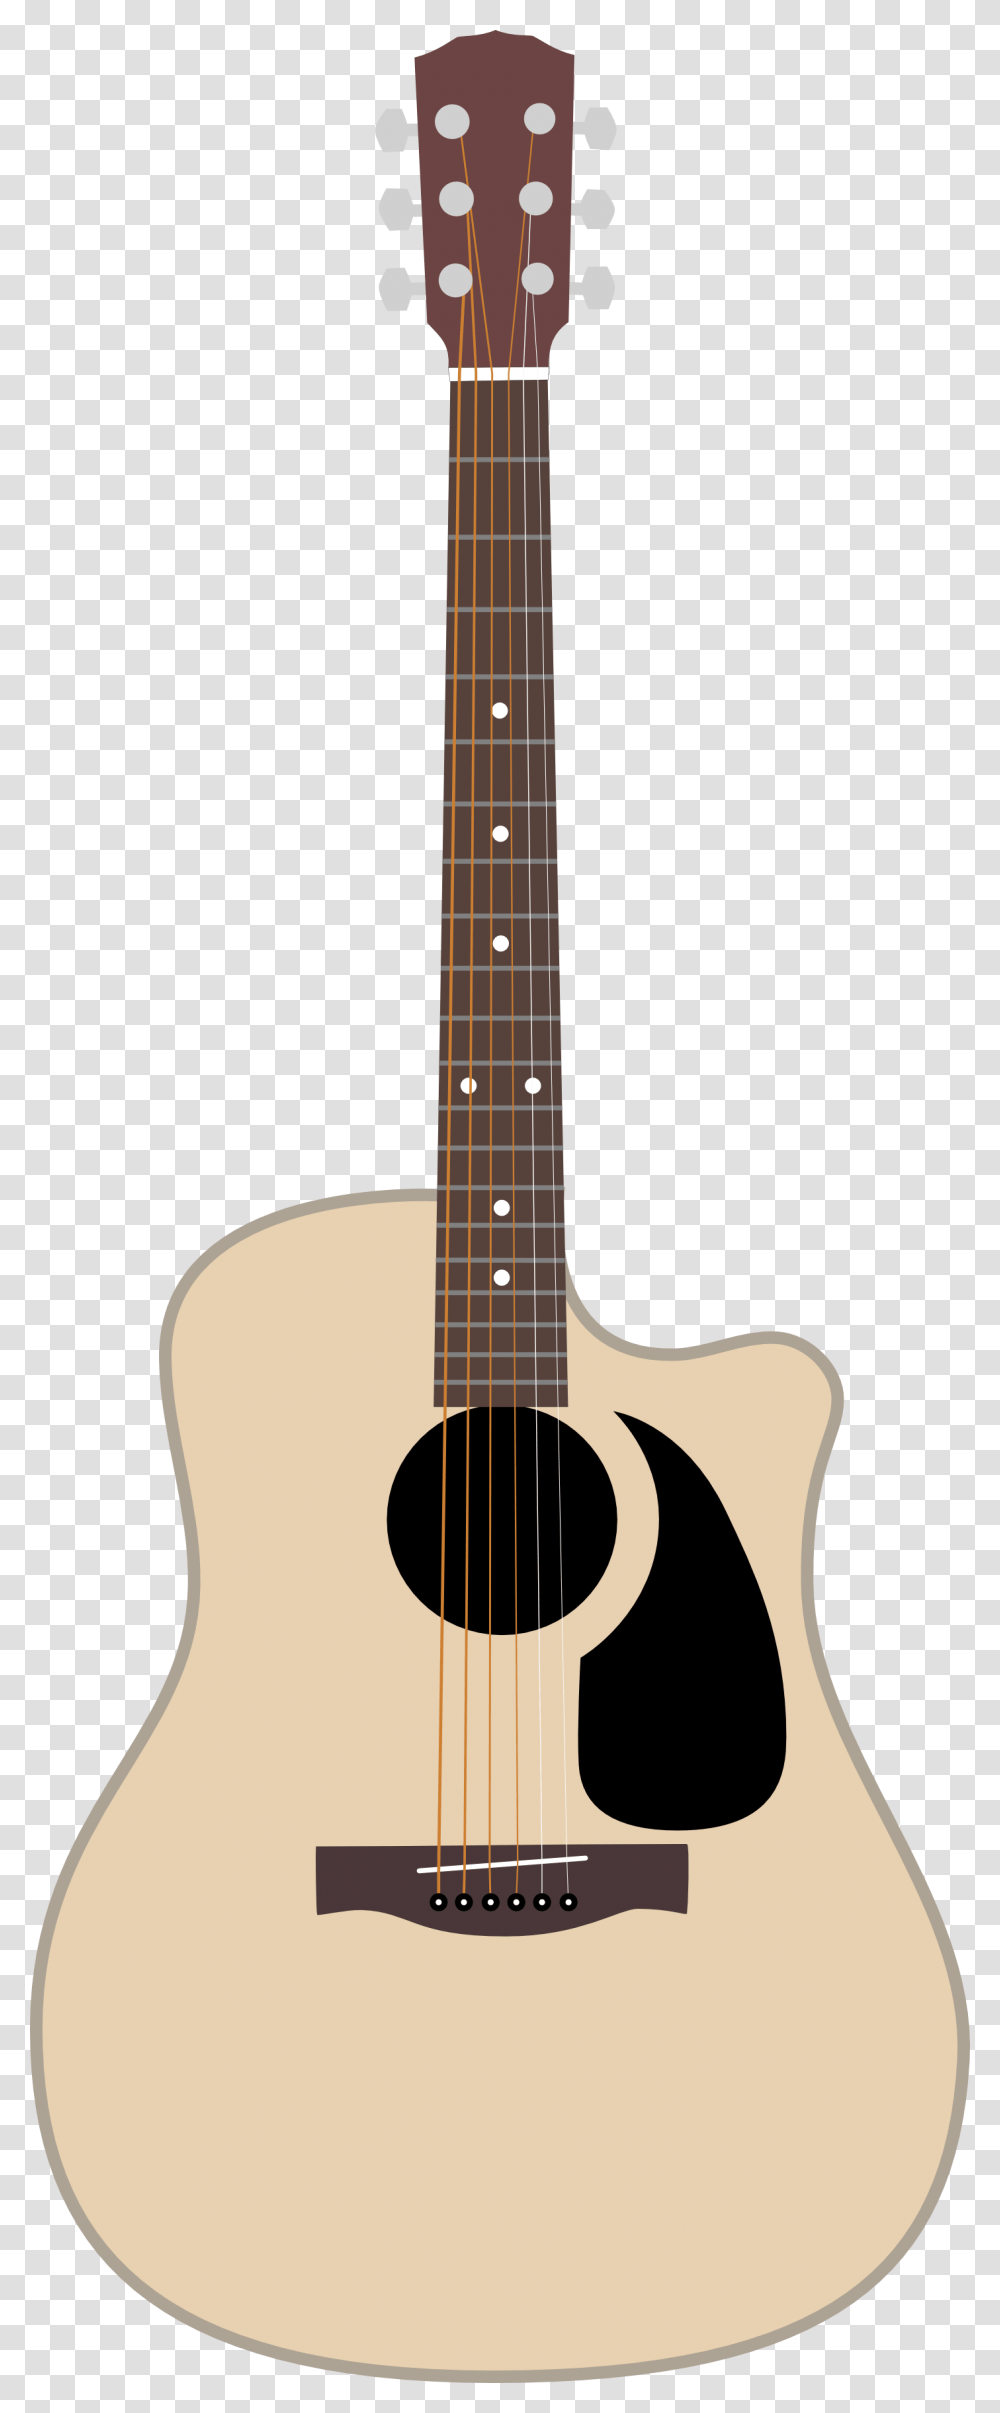 Fender Cd 100ce Acoustic Guitar By Shimmerscroll Acoustic Guitar, Leisure Activities, Musical Instrument, Mandolin, Bass Guitar Transparent Png